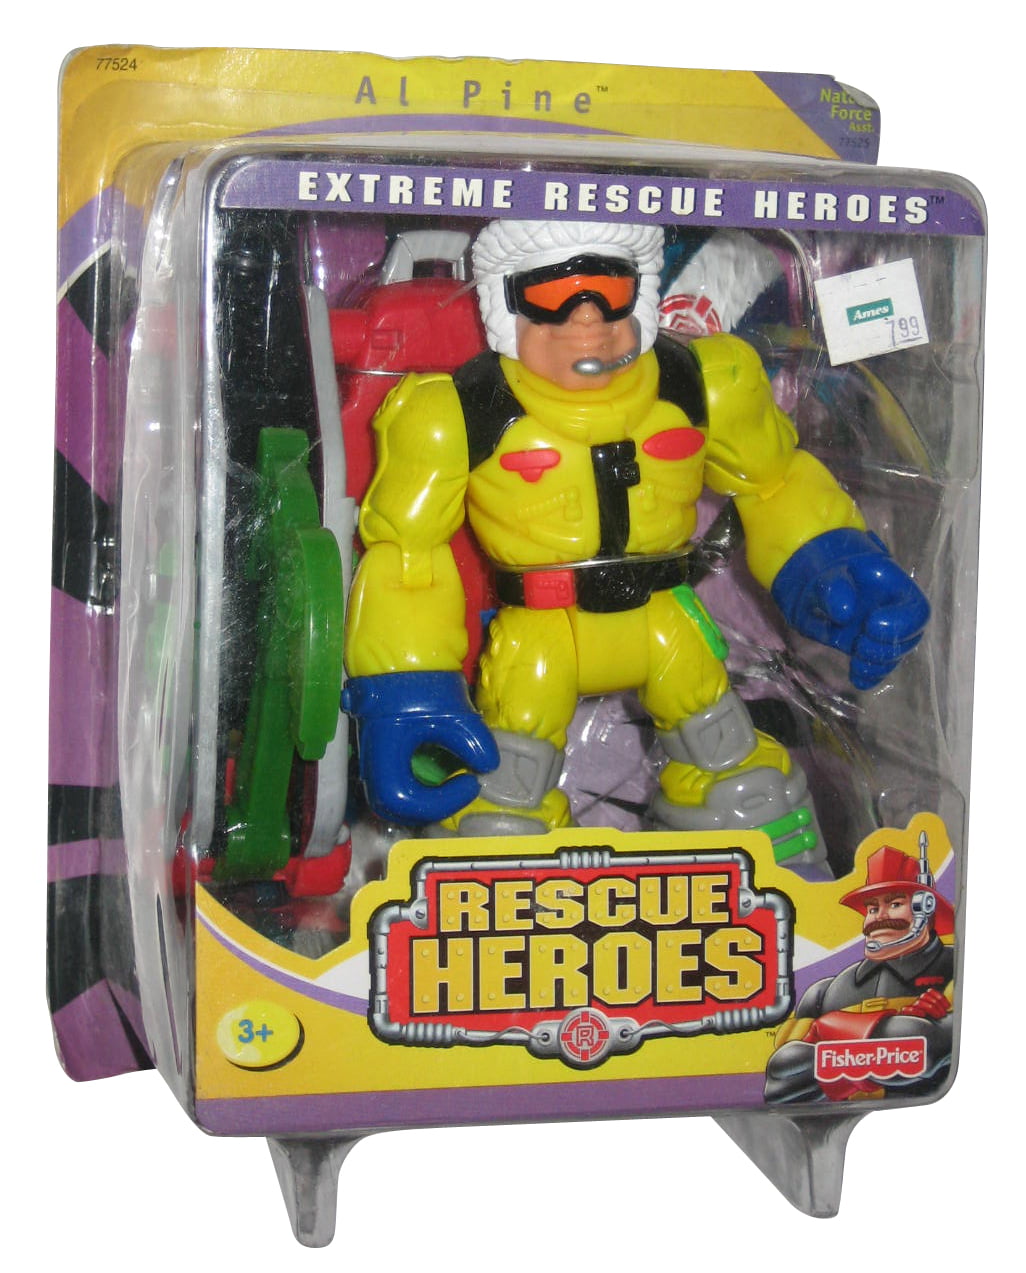 Lot Of 5 Fisher Price Rescue Heroes Action Figure TEACH STEM CAREERS BRAND NEW